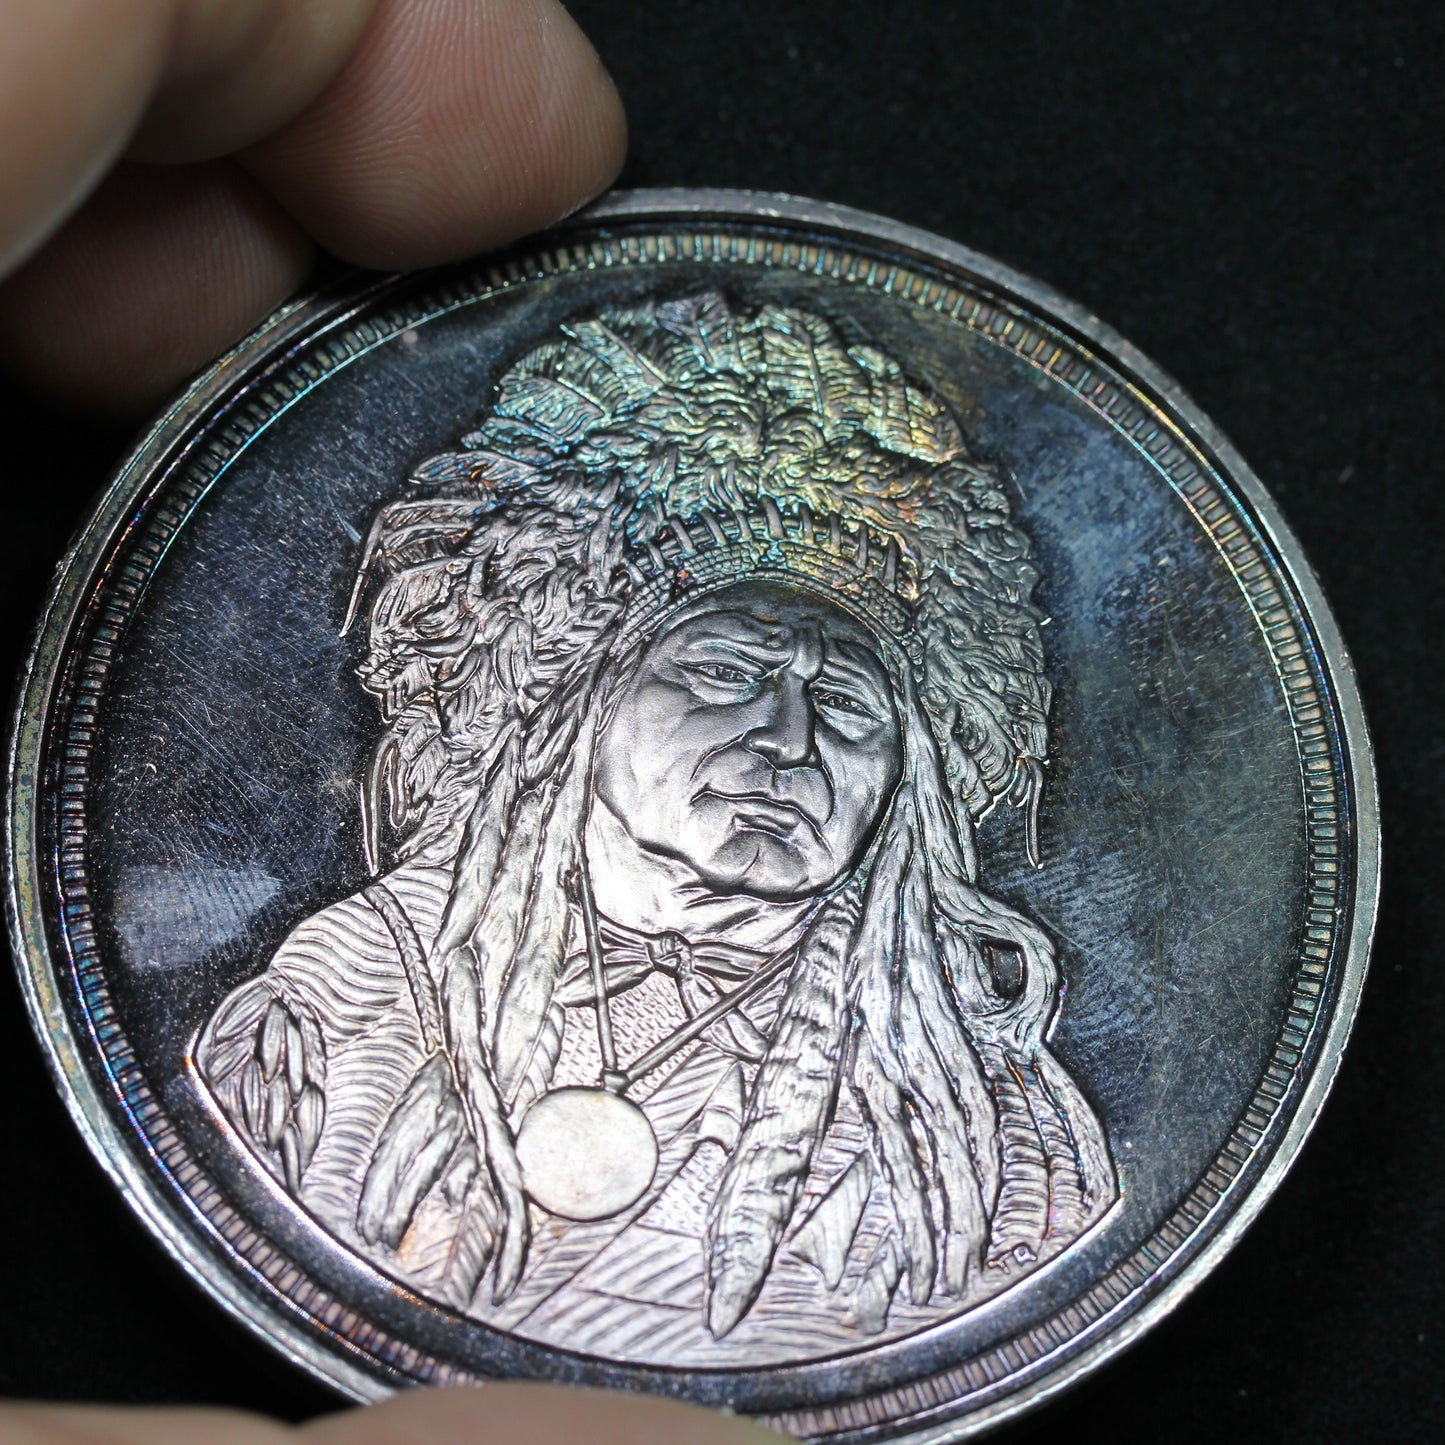 5 oz .999+ Fine Silver Art Round - Running Antelope The Silver Chief $50 - Toned